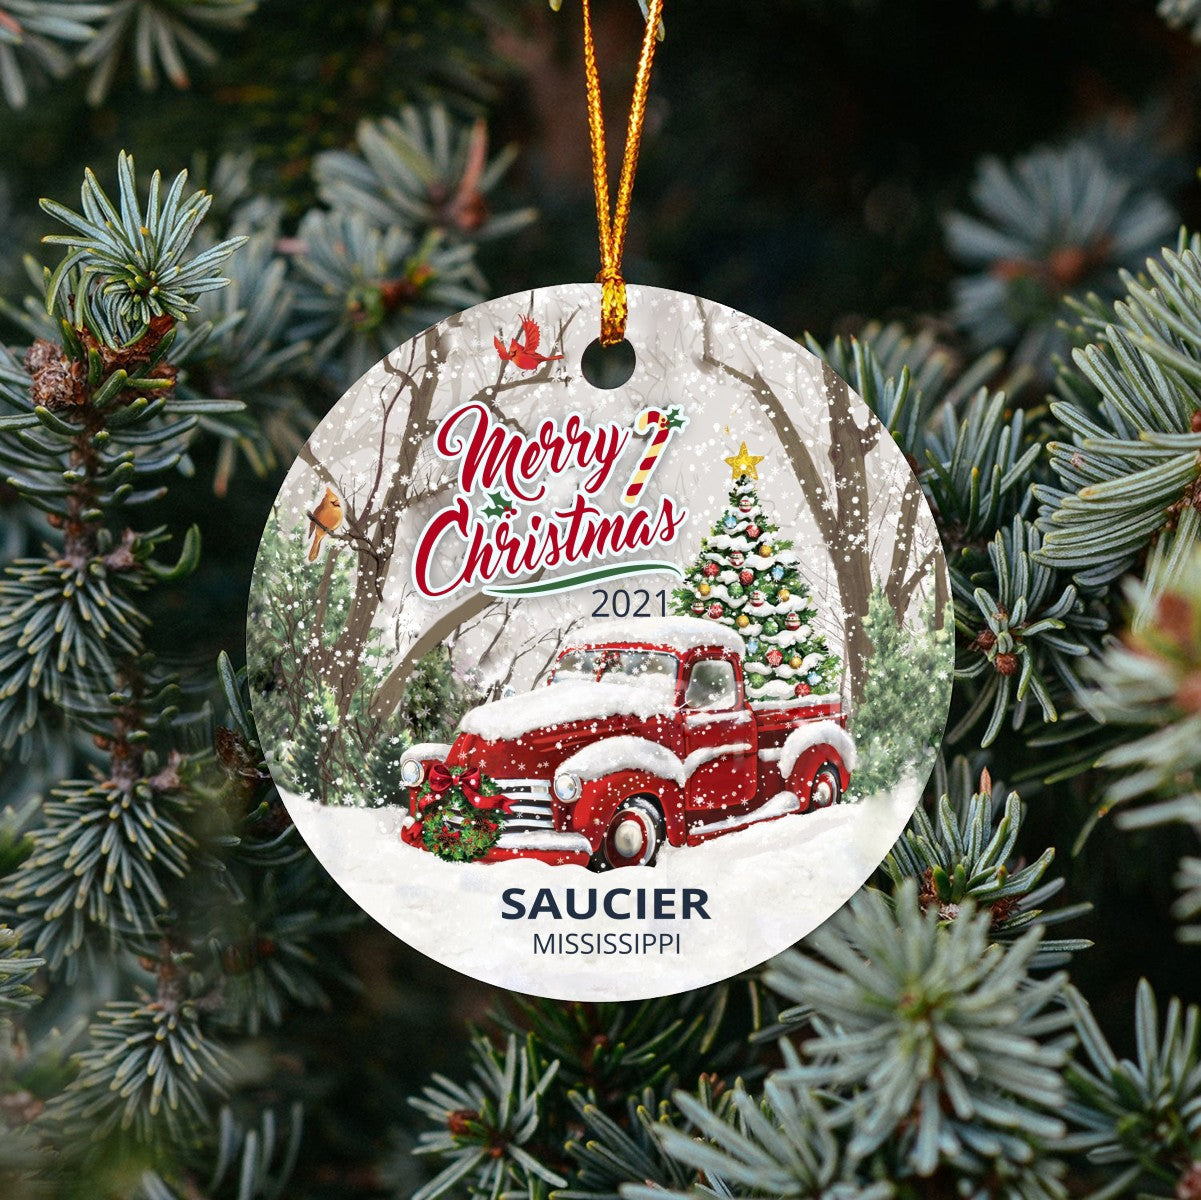 Christmas Tree Ornaments Saucier - Ornament With Name City, State Saucier Mississippi MS Ornament - Red Truck Xmas Ornaments 3'' Plastic Gift For Family, Friend And Housewarming